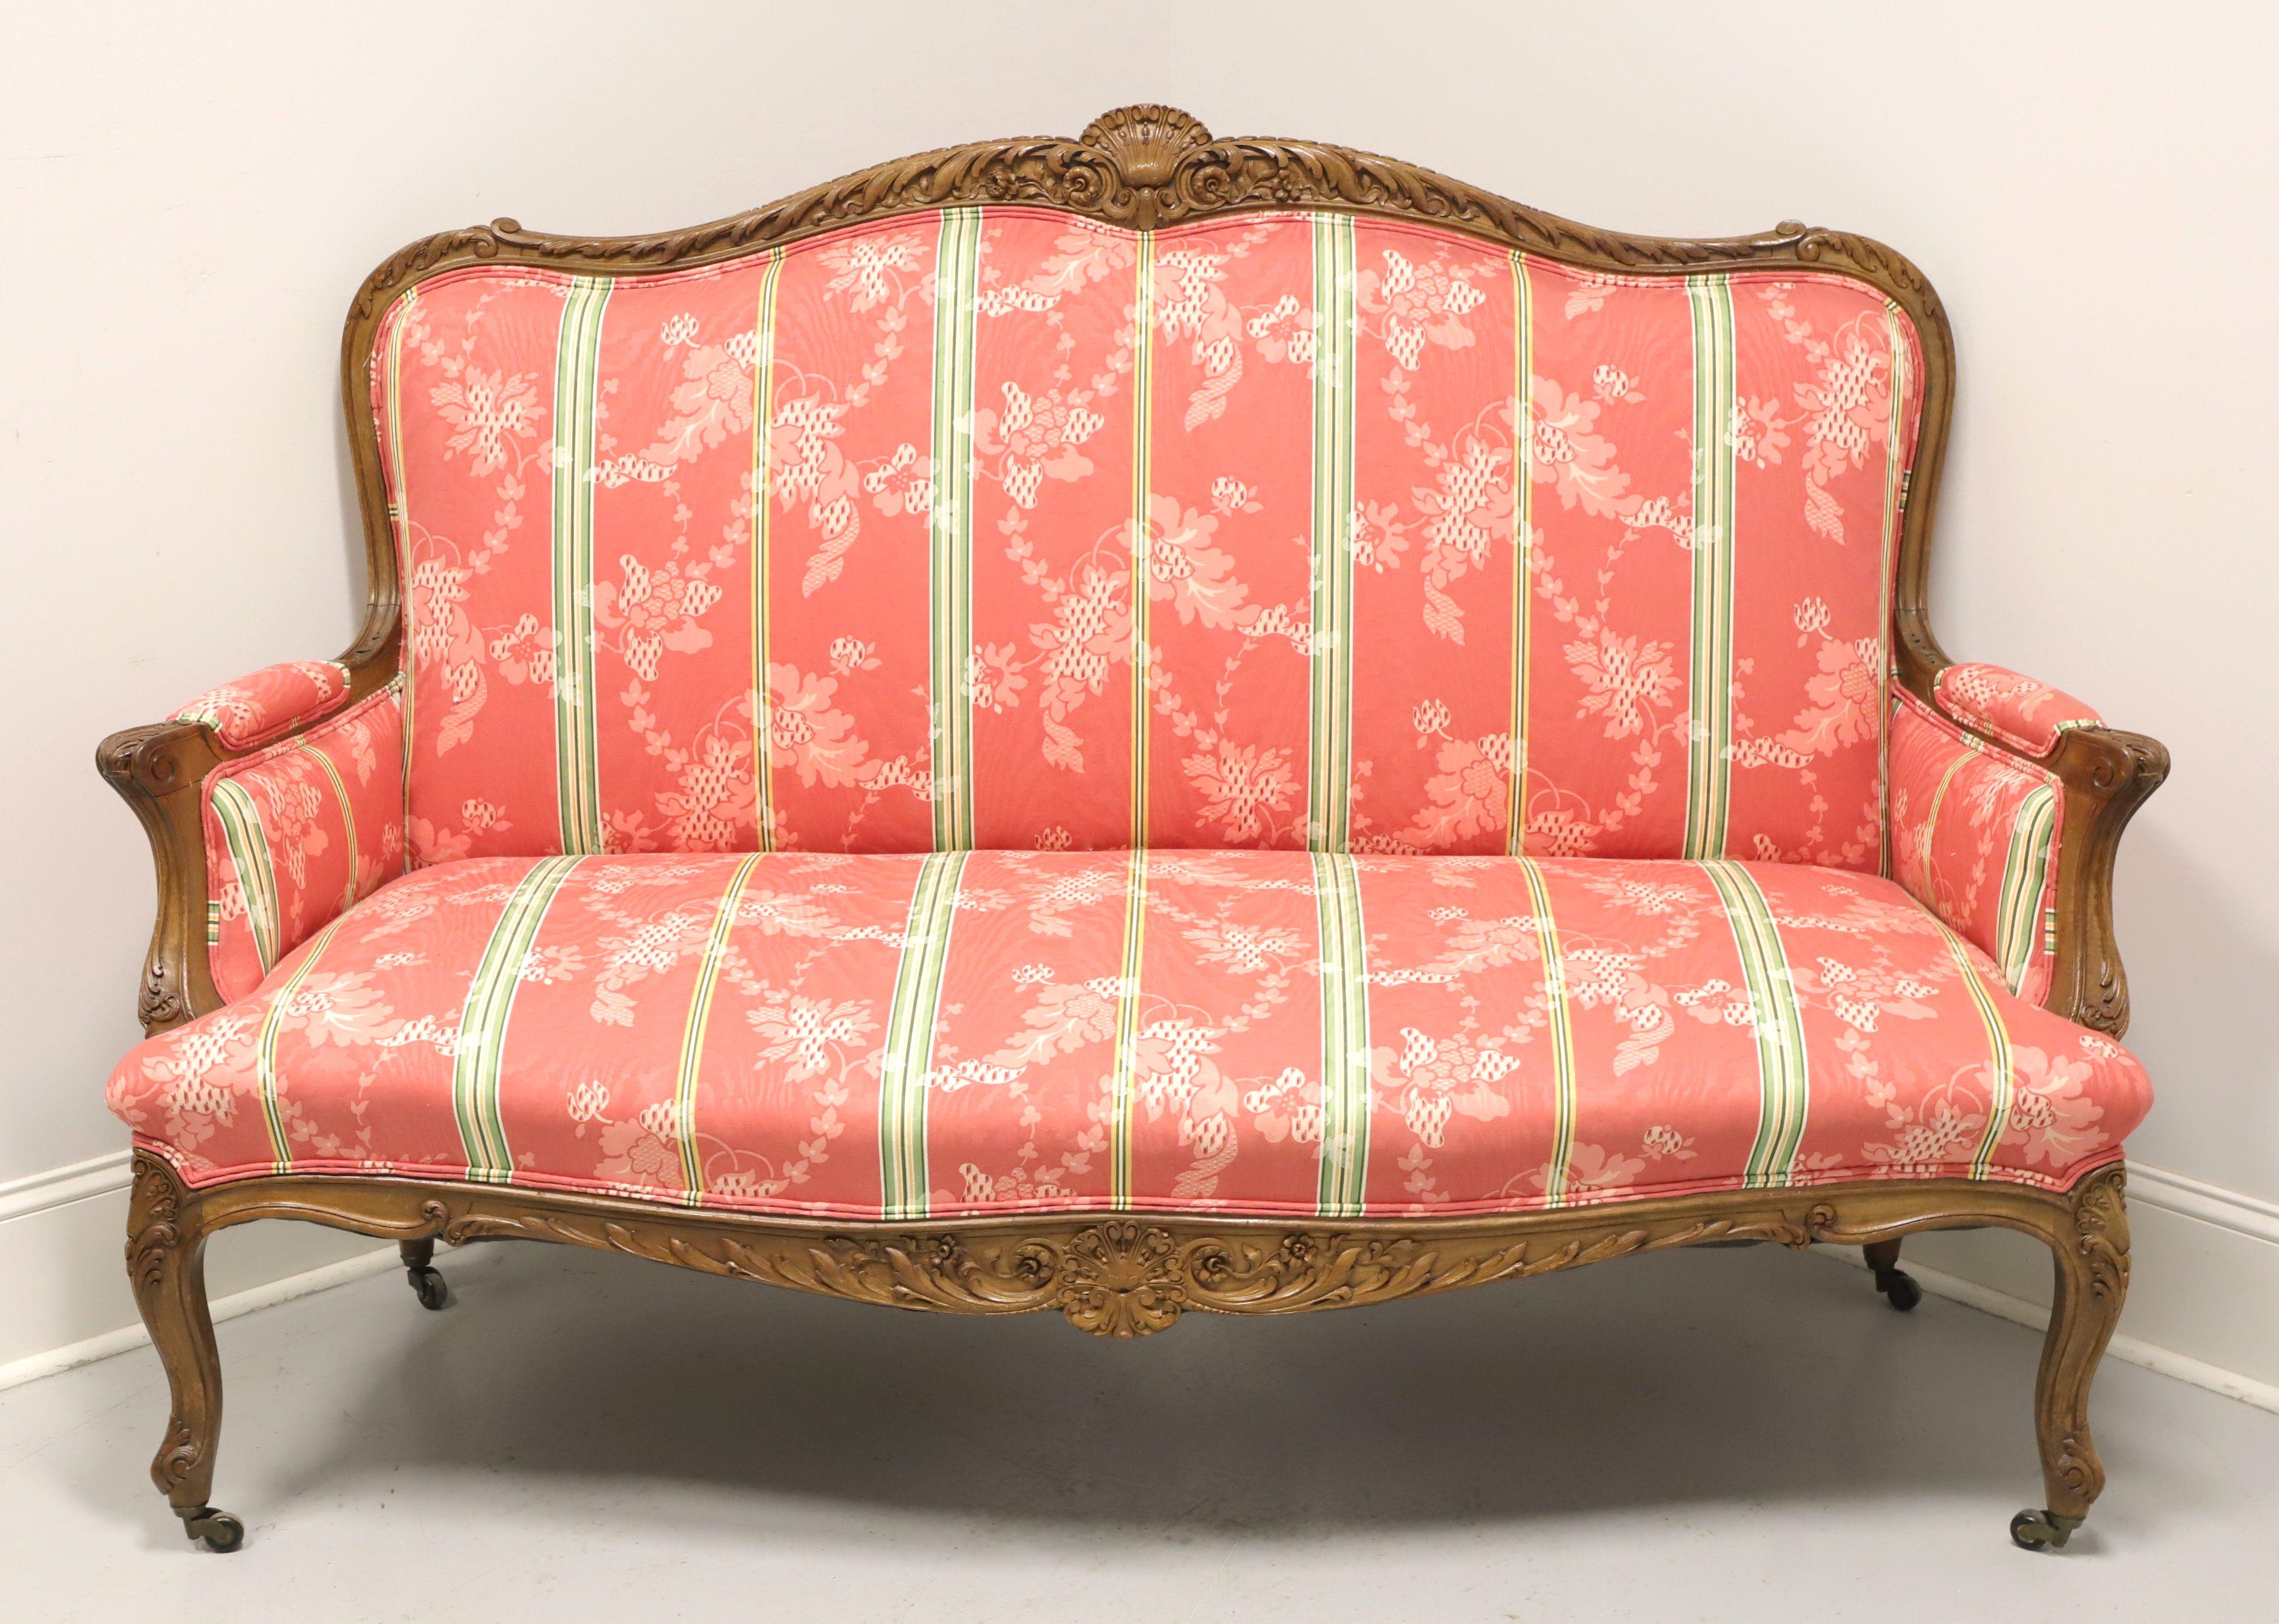 An antique French Country Louis XV style settee, unbranded. Frame made in the 19th Century of finely carved walnut with high back; decorative carving to back, arms, apron & knees; fabric upholstered arms; and curved front & back legs with metal &